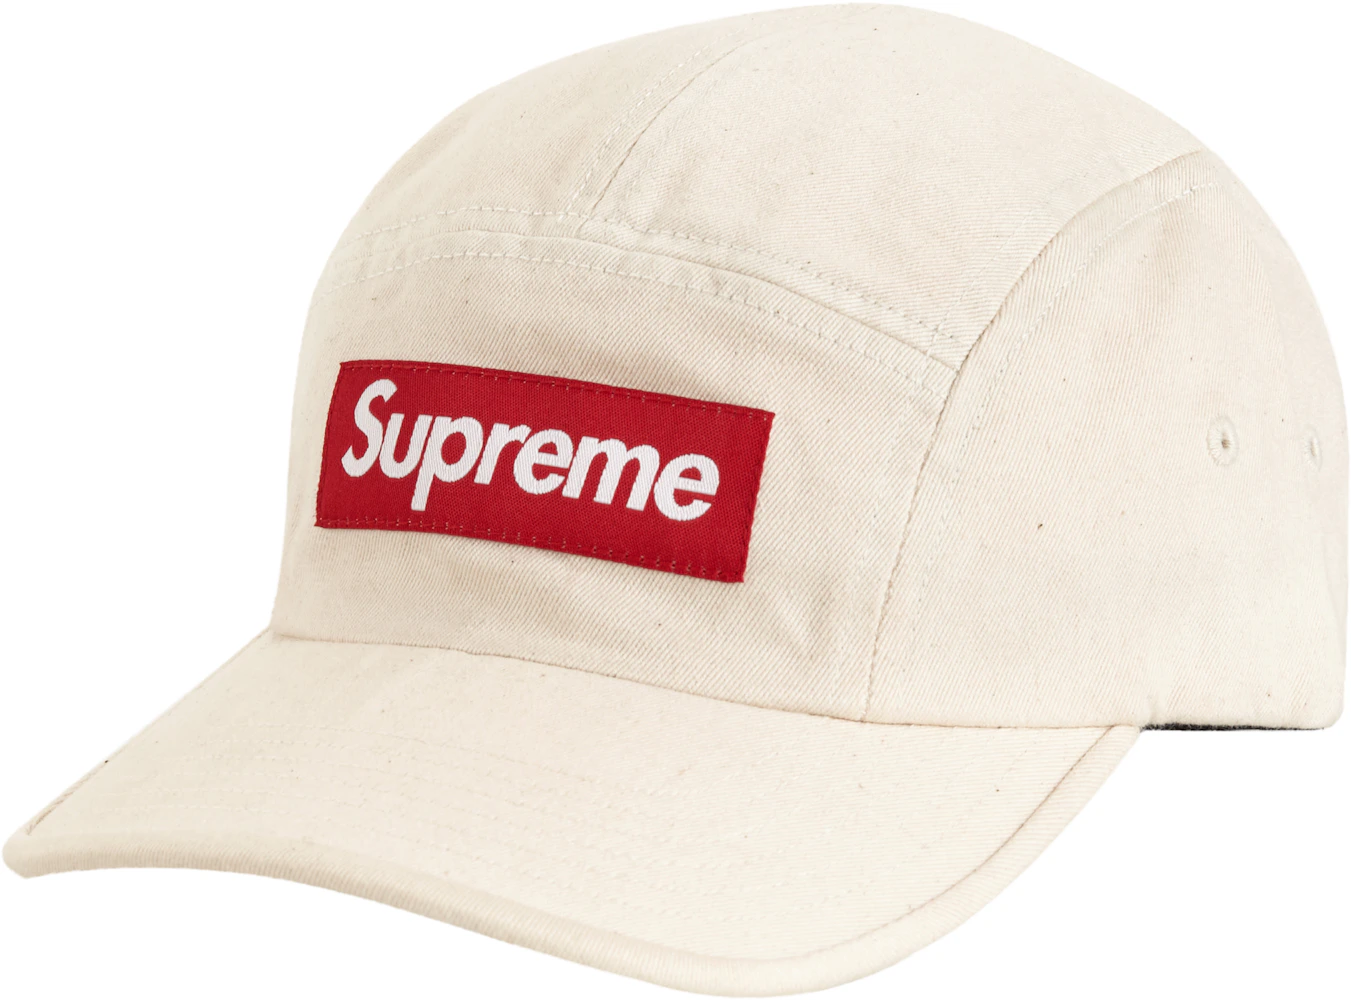 Supreme Washed Chino Twill Camp Cap (FW20) Natural - FW20 - US